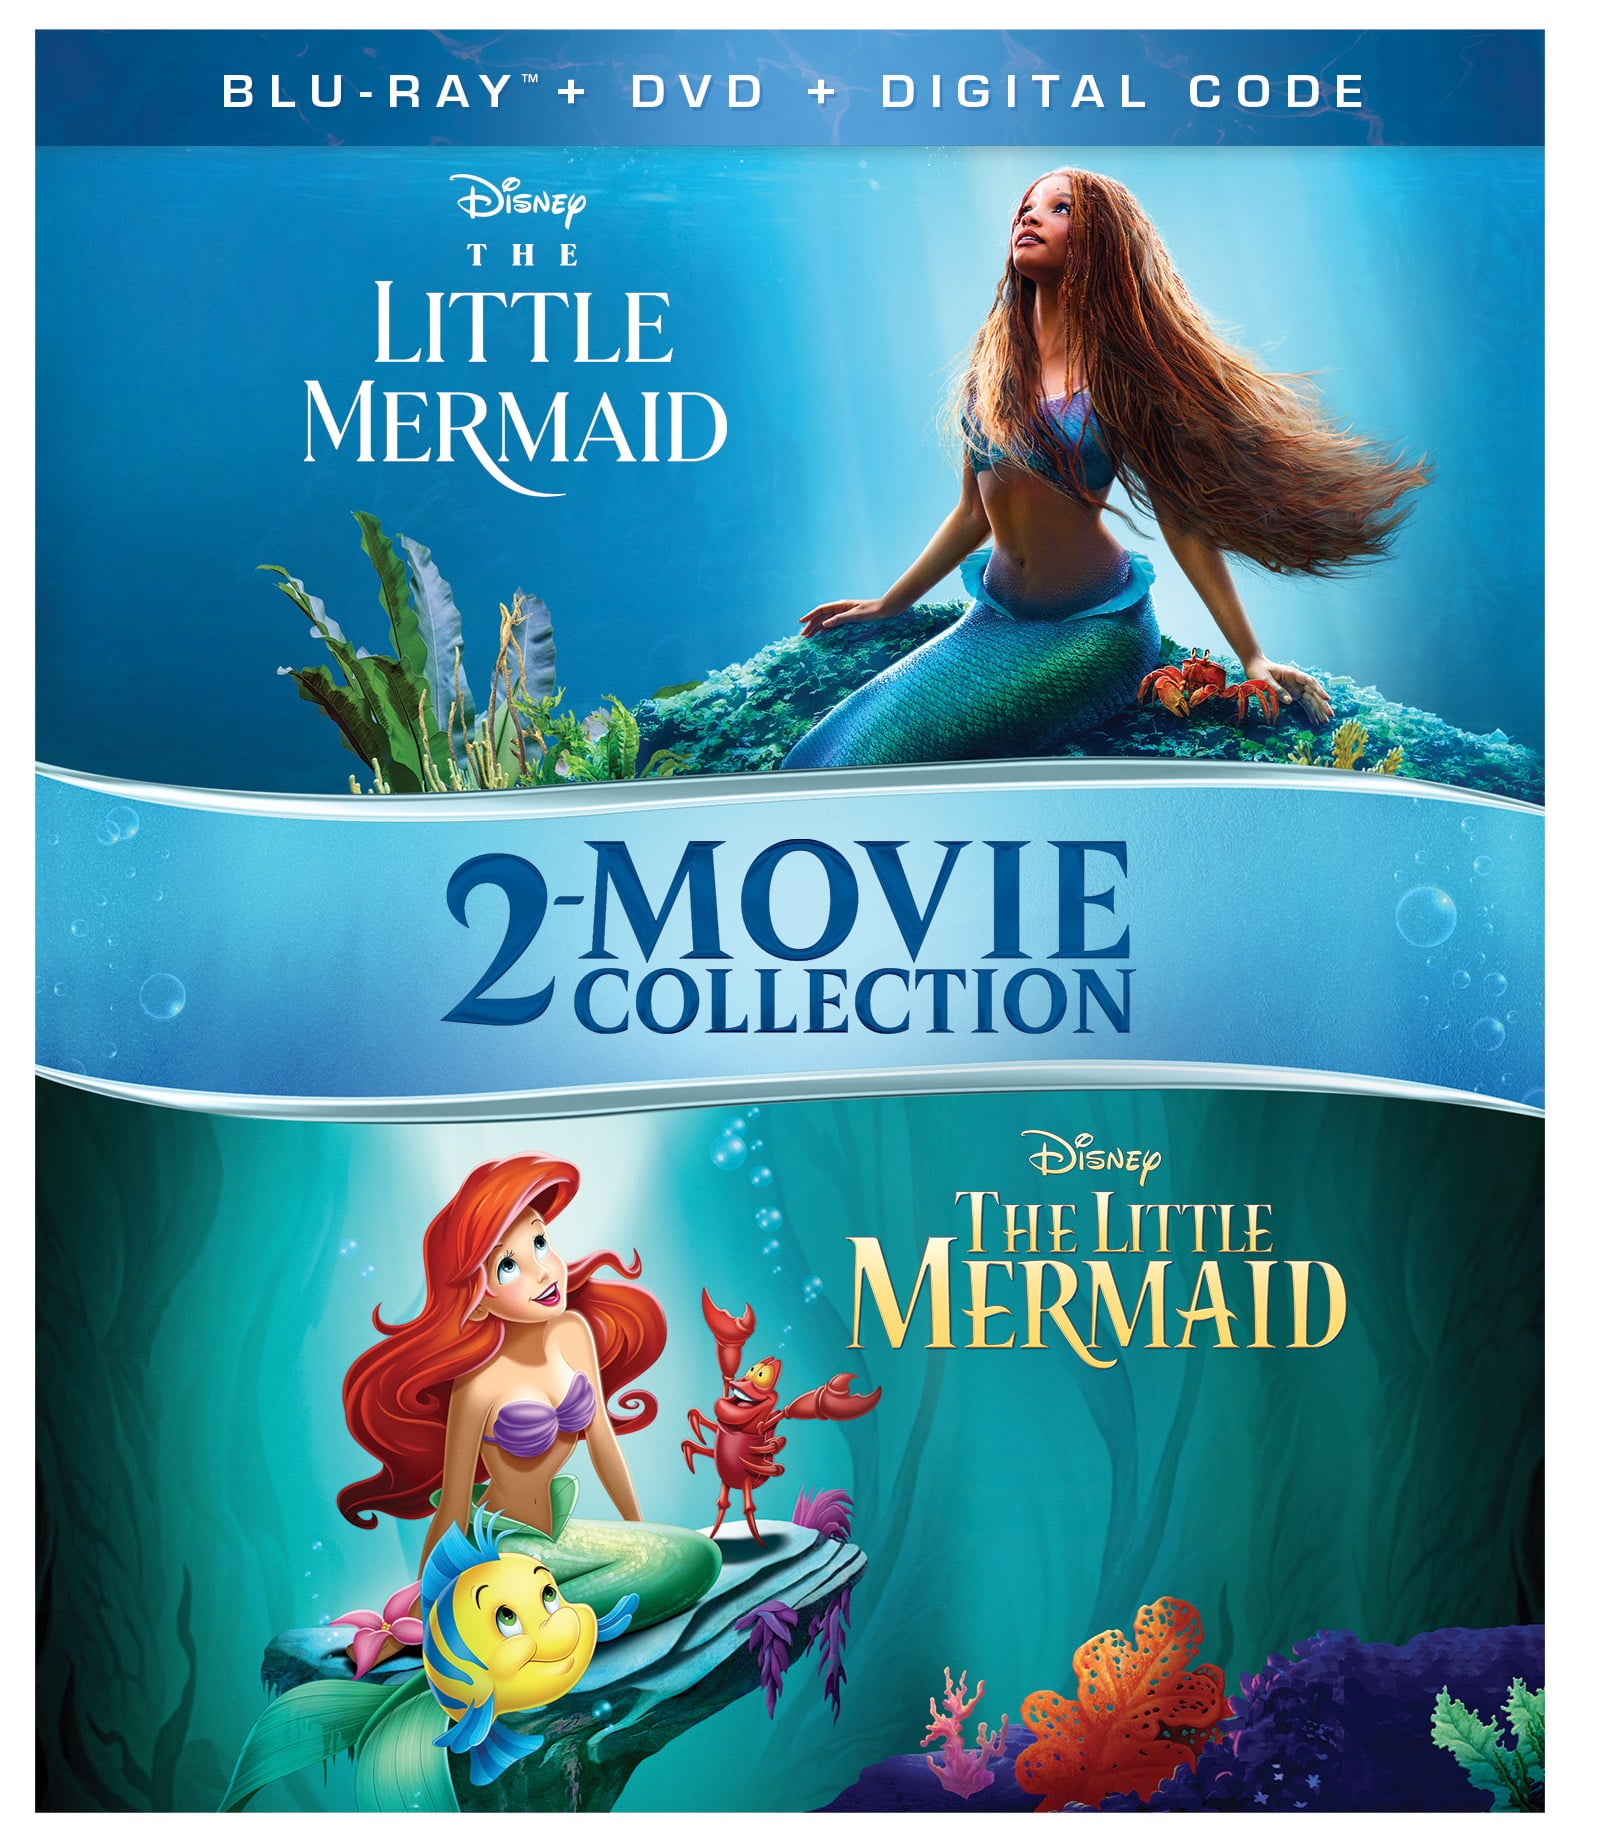 The Little Mermaid 2-Movie Collection (2 Blu-ray + 2 DVD + Digital Code ...